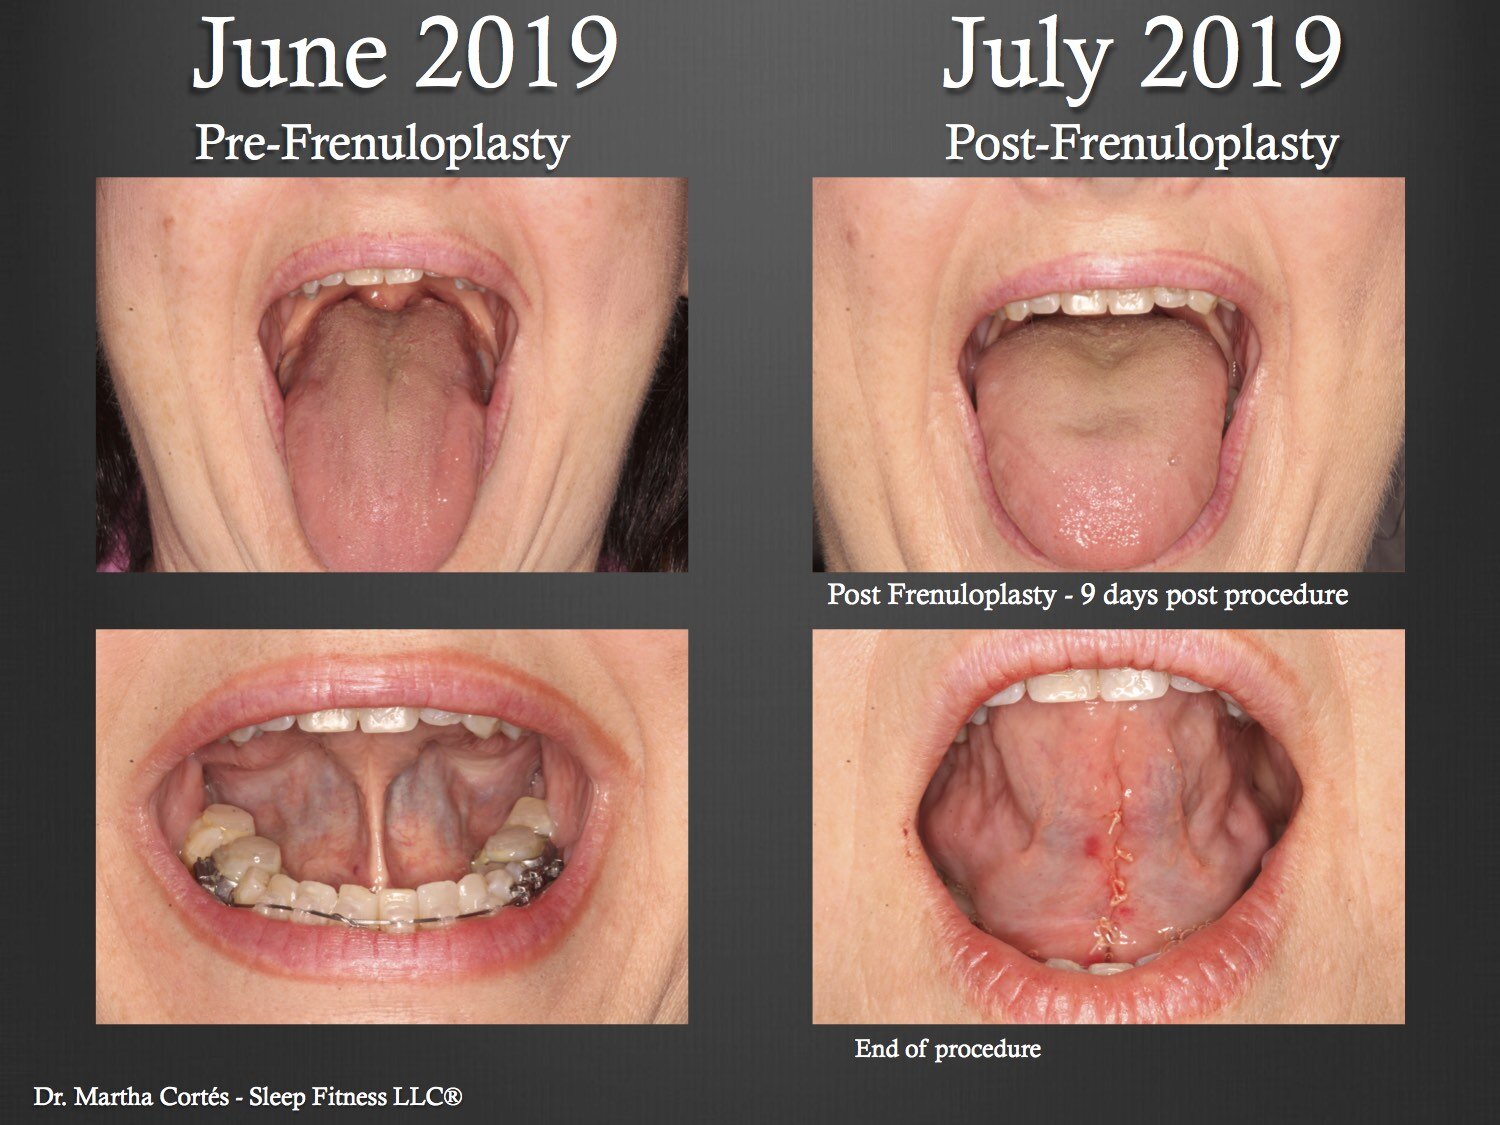  Case 1 Pre and Post tongue tie release diagnostic intra oral photos showing the changes in the tongues range of motion 